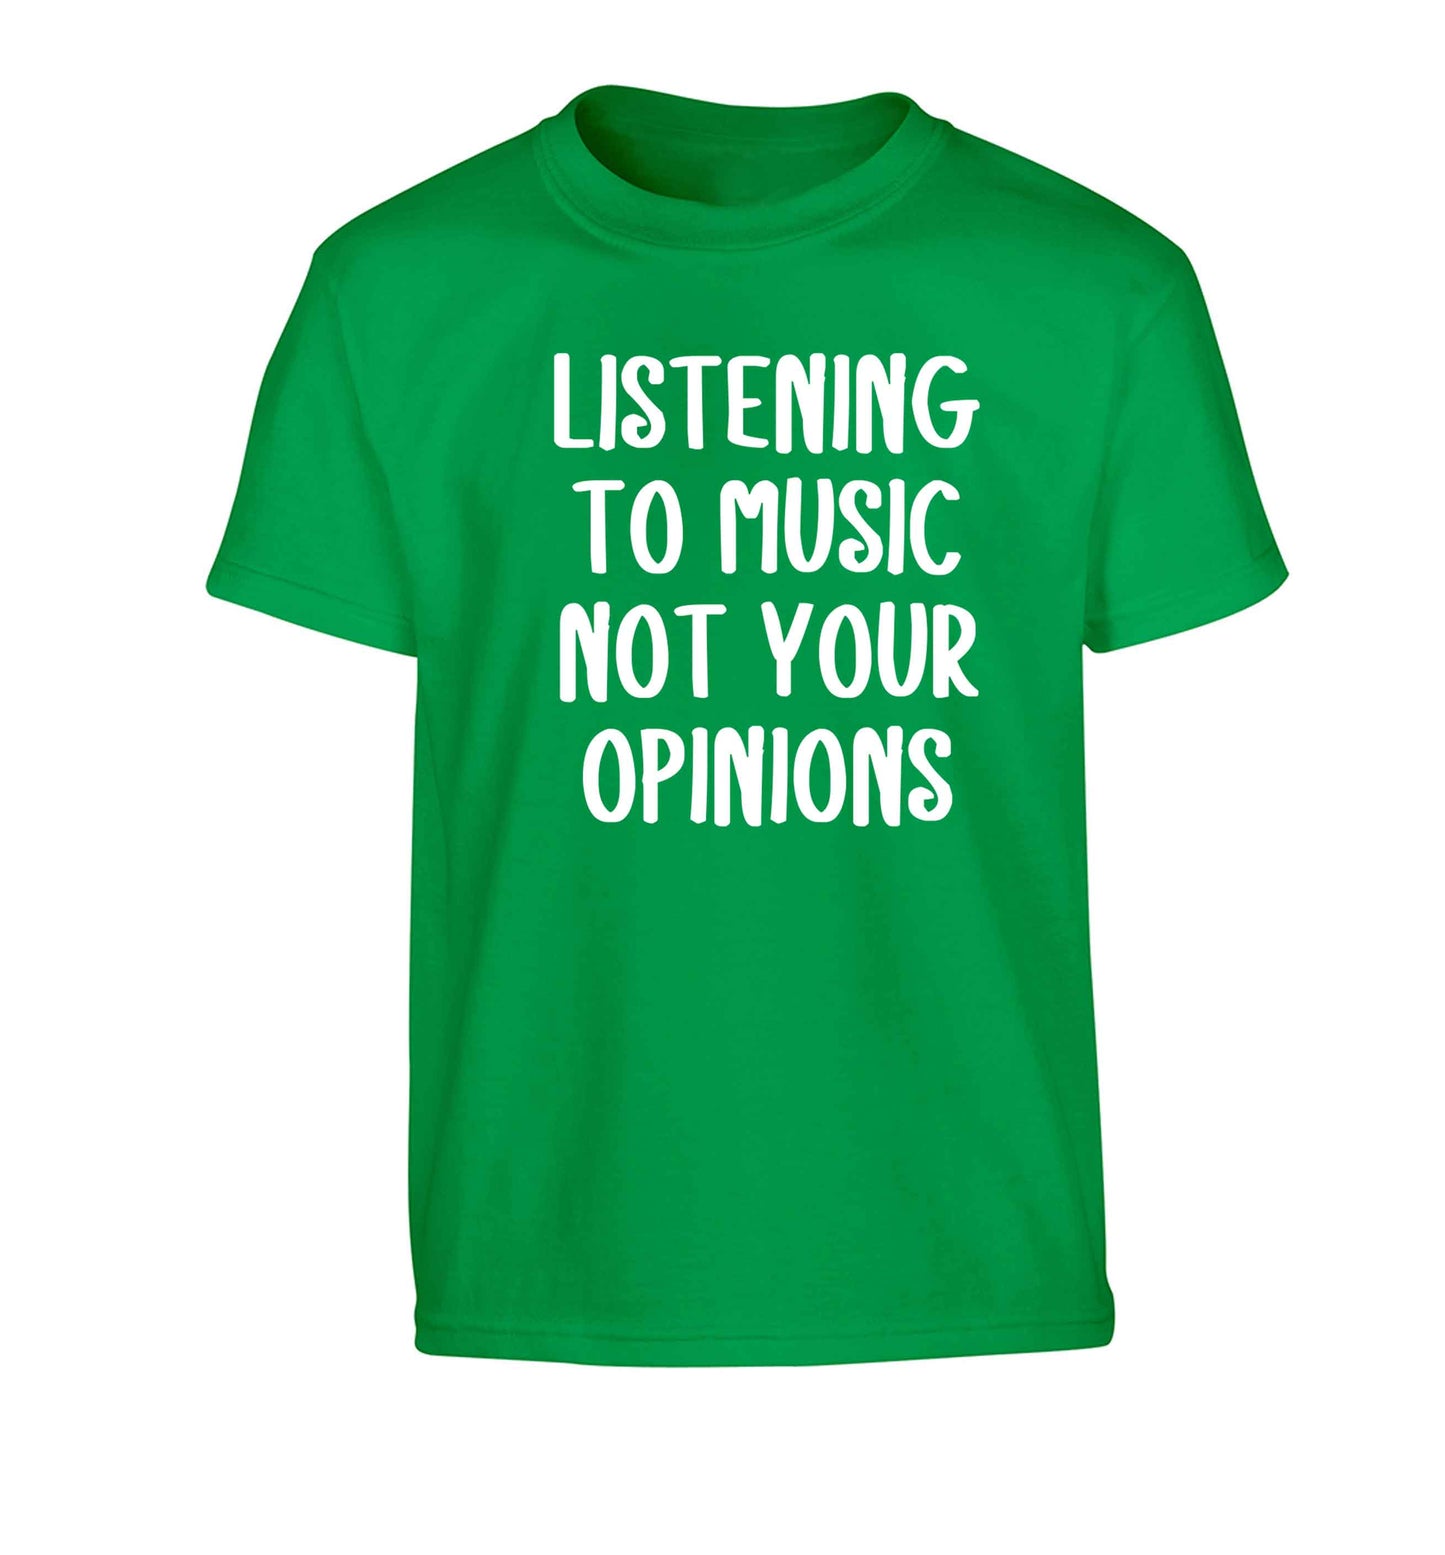 Listening to music not your opinions Children's green Tshirt 12-13 Years